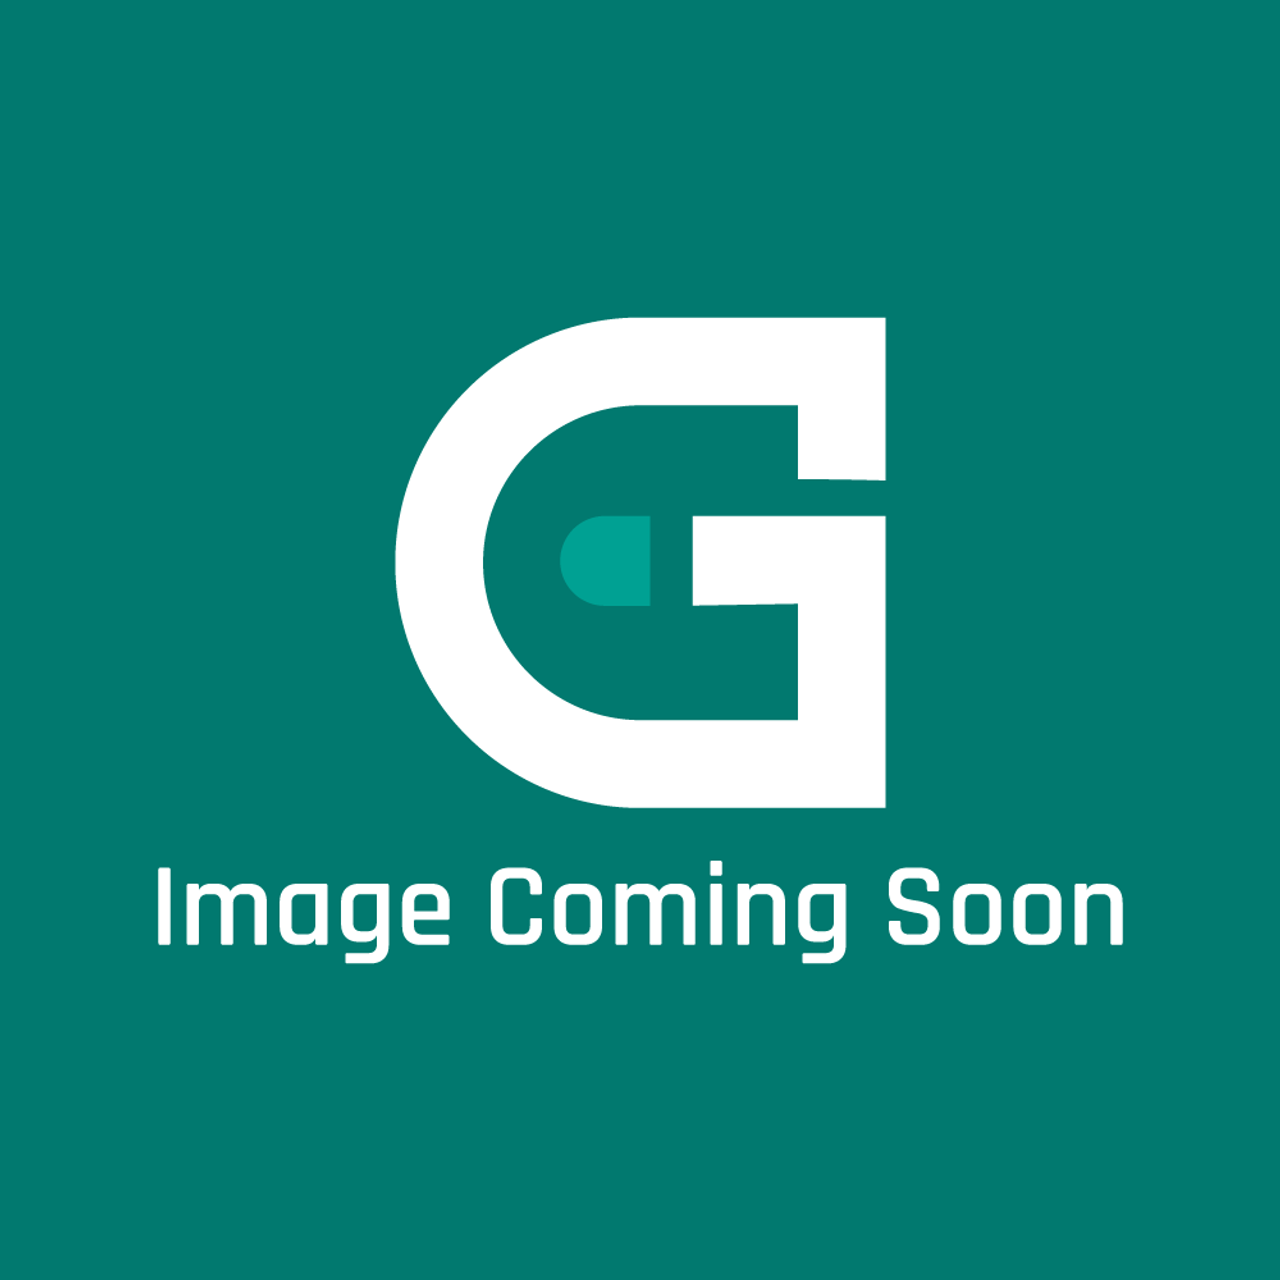 Garland 1411500 - Casing Bottom Gce - Image Coming Soon!